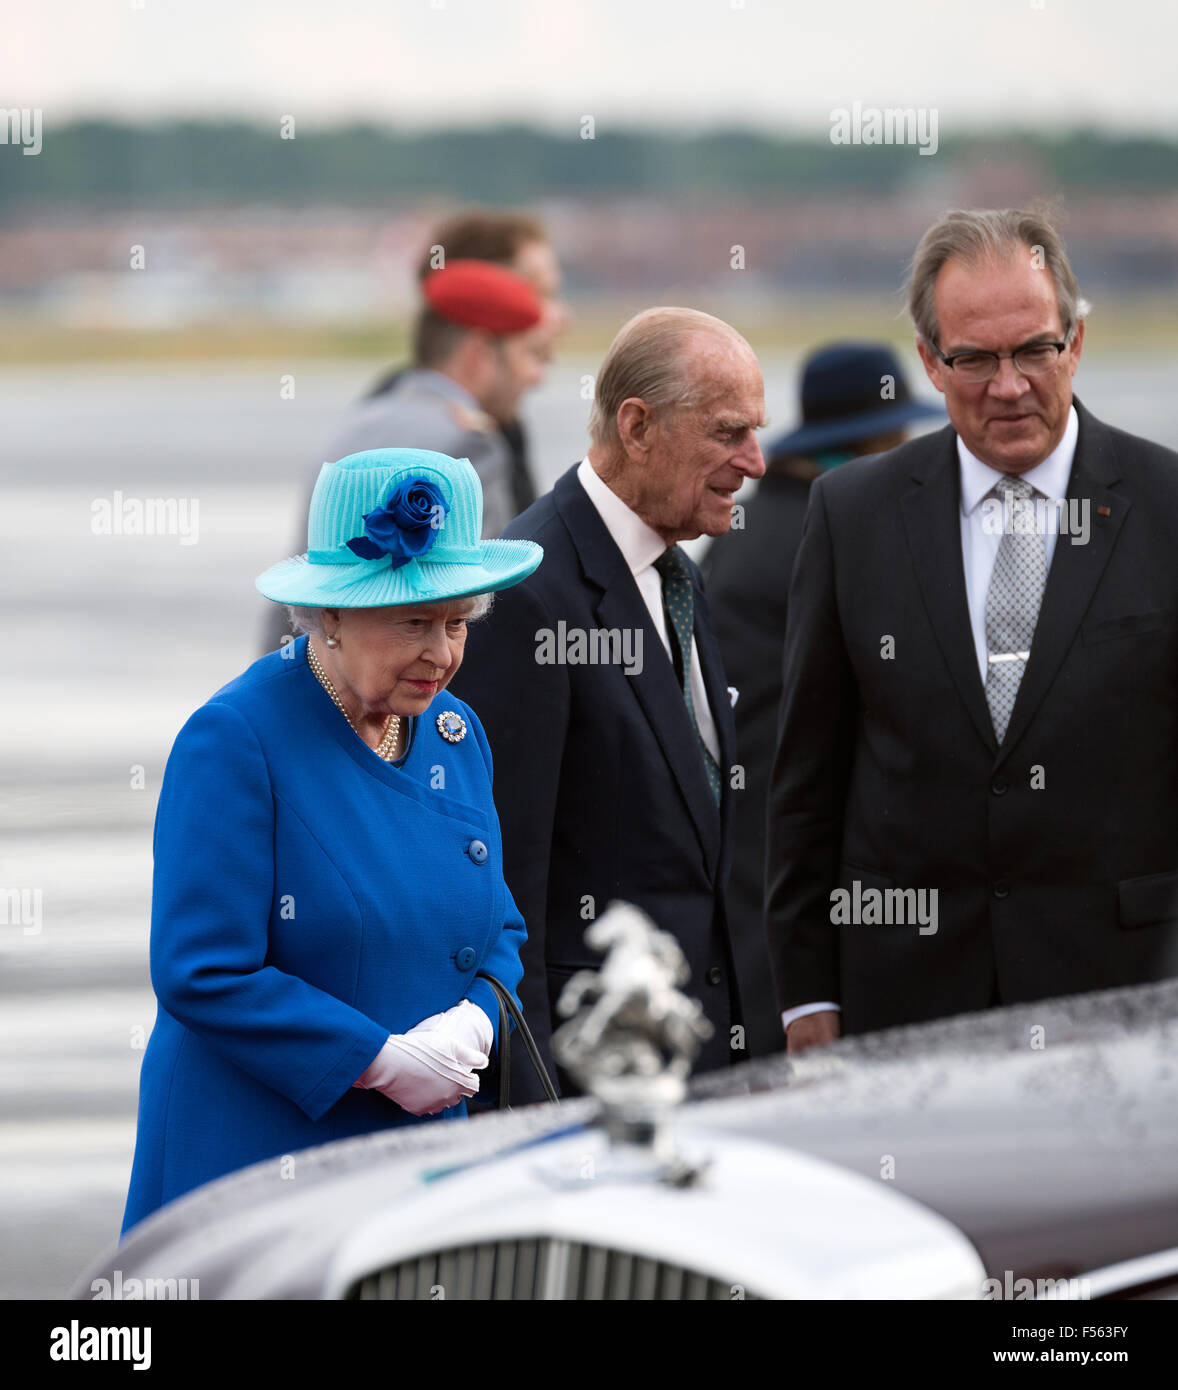 23.06.2015, Berlin, Berlin, Germany - Military part of Berlin's Tegel Airport. State visit of Queen Elisabeth II. And her husband HRH Prince Philip, Duke of Edinburgh, in Germany. The monarch himself traveled in royal blue, with turquoise velvet hat dark blue flower. EBS150623D002CAROEX.JPG - NOT for SALE in G E R M A N Y, A U S T R I A, S W I T Z E R L A N D [MODEL RELEASE: NO, PROPERTY RELEASE: NO (c) caro photo agency / Schulz, http://www.caro-images.pl, info@carofoto.pl - In case of using the picture for non-journalistic purposes, please contact the agency - the picture is subject to royal Stock Photo